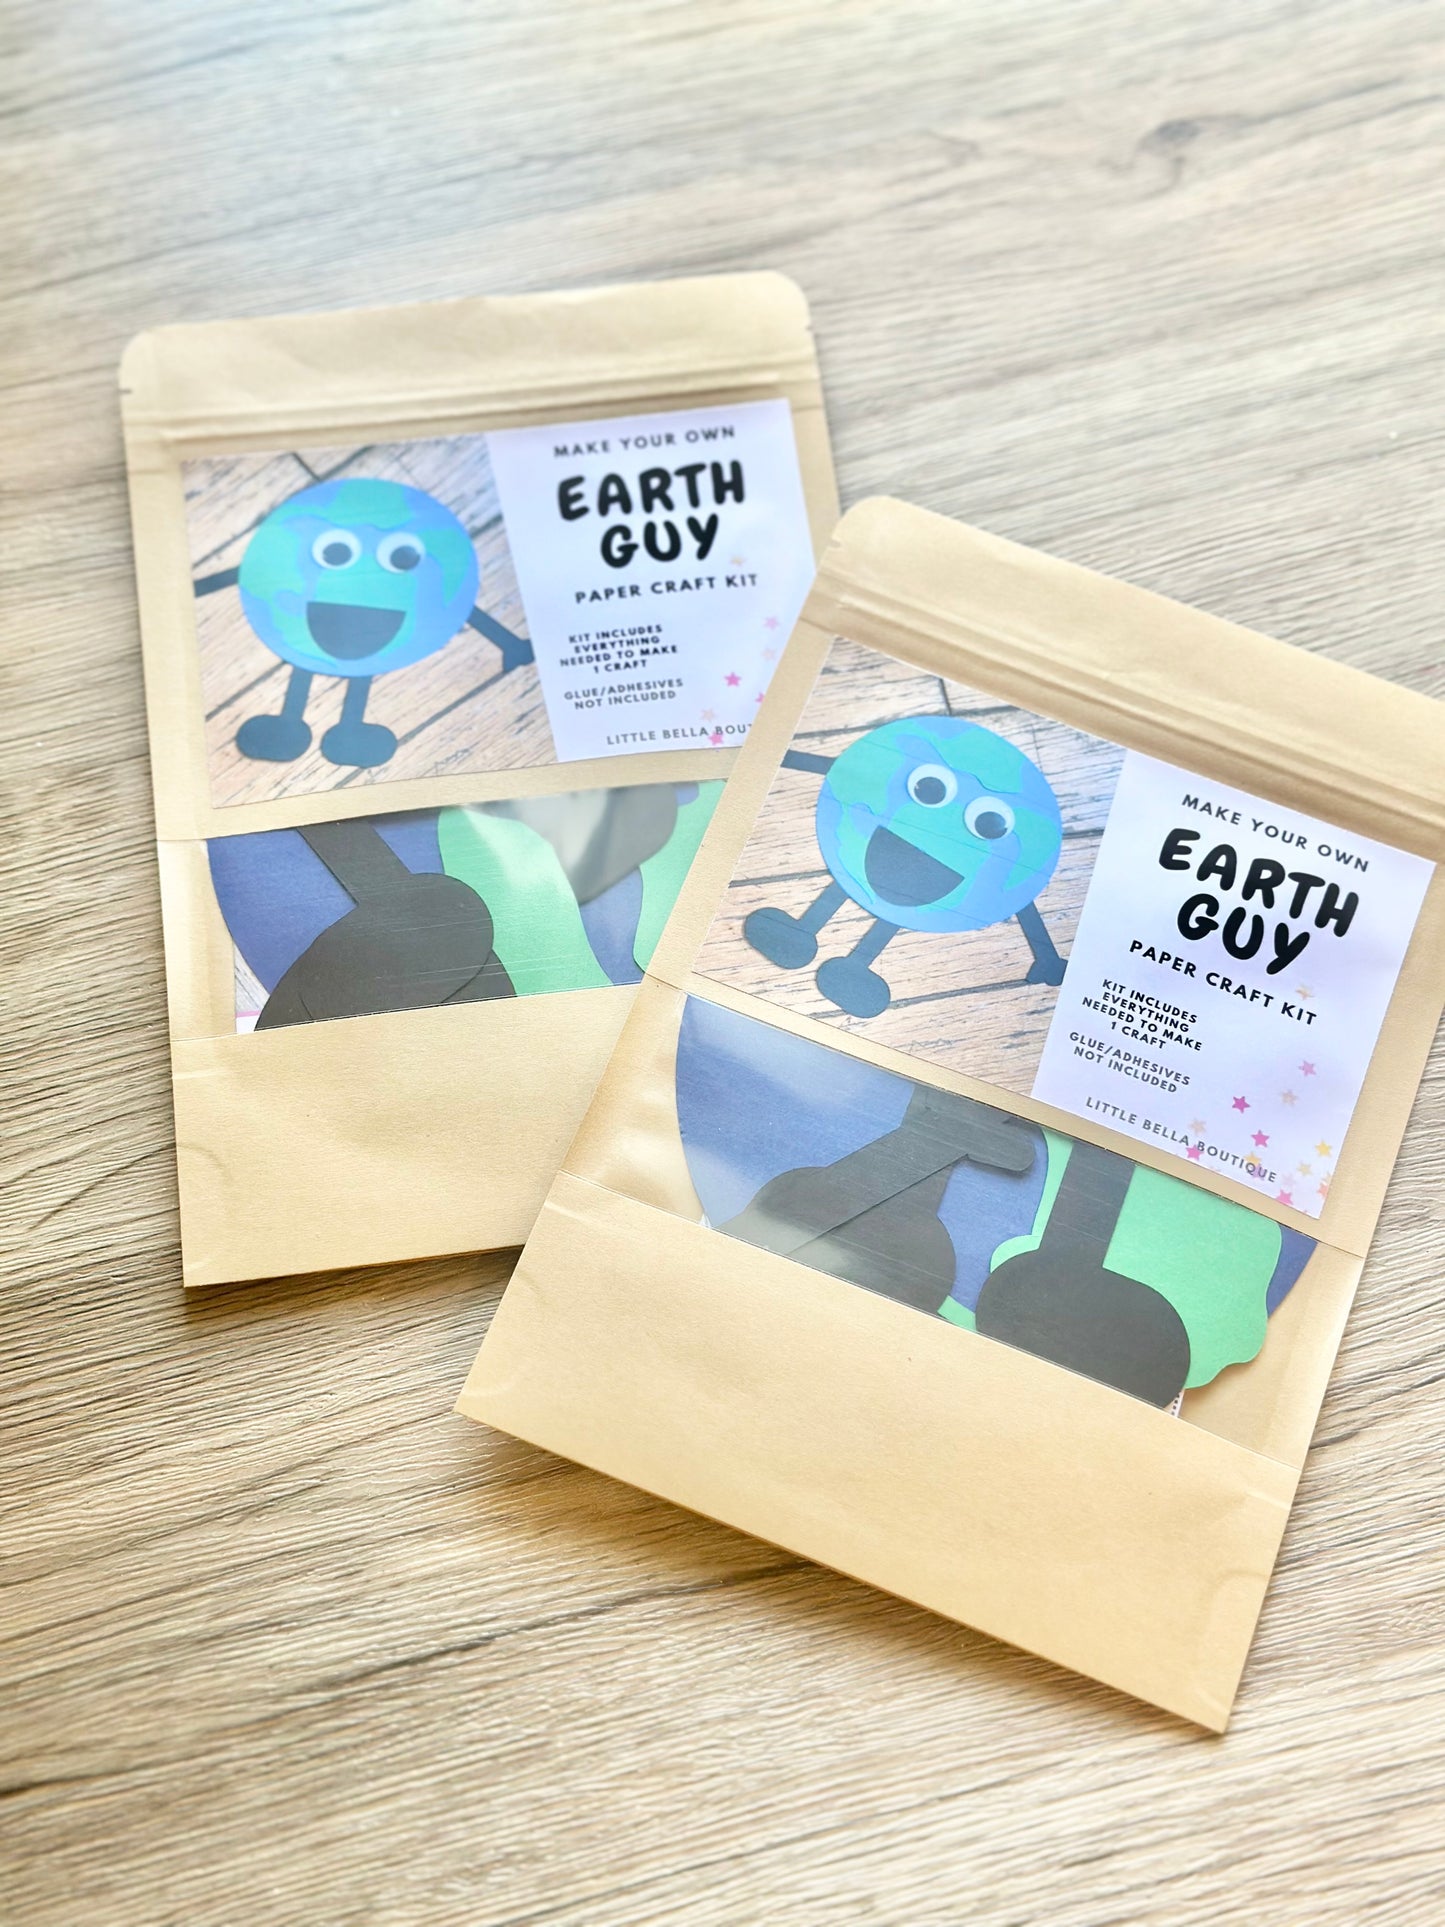 Make Your Own Earth Guy Paper Craft Kit